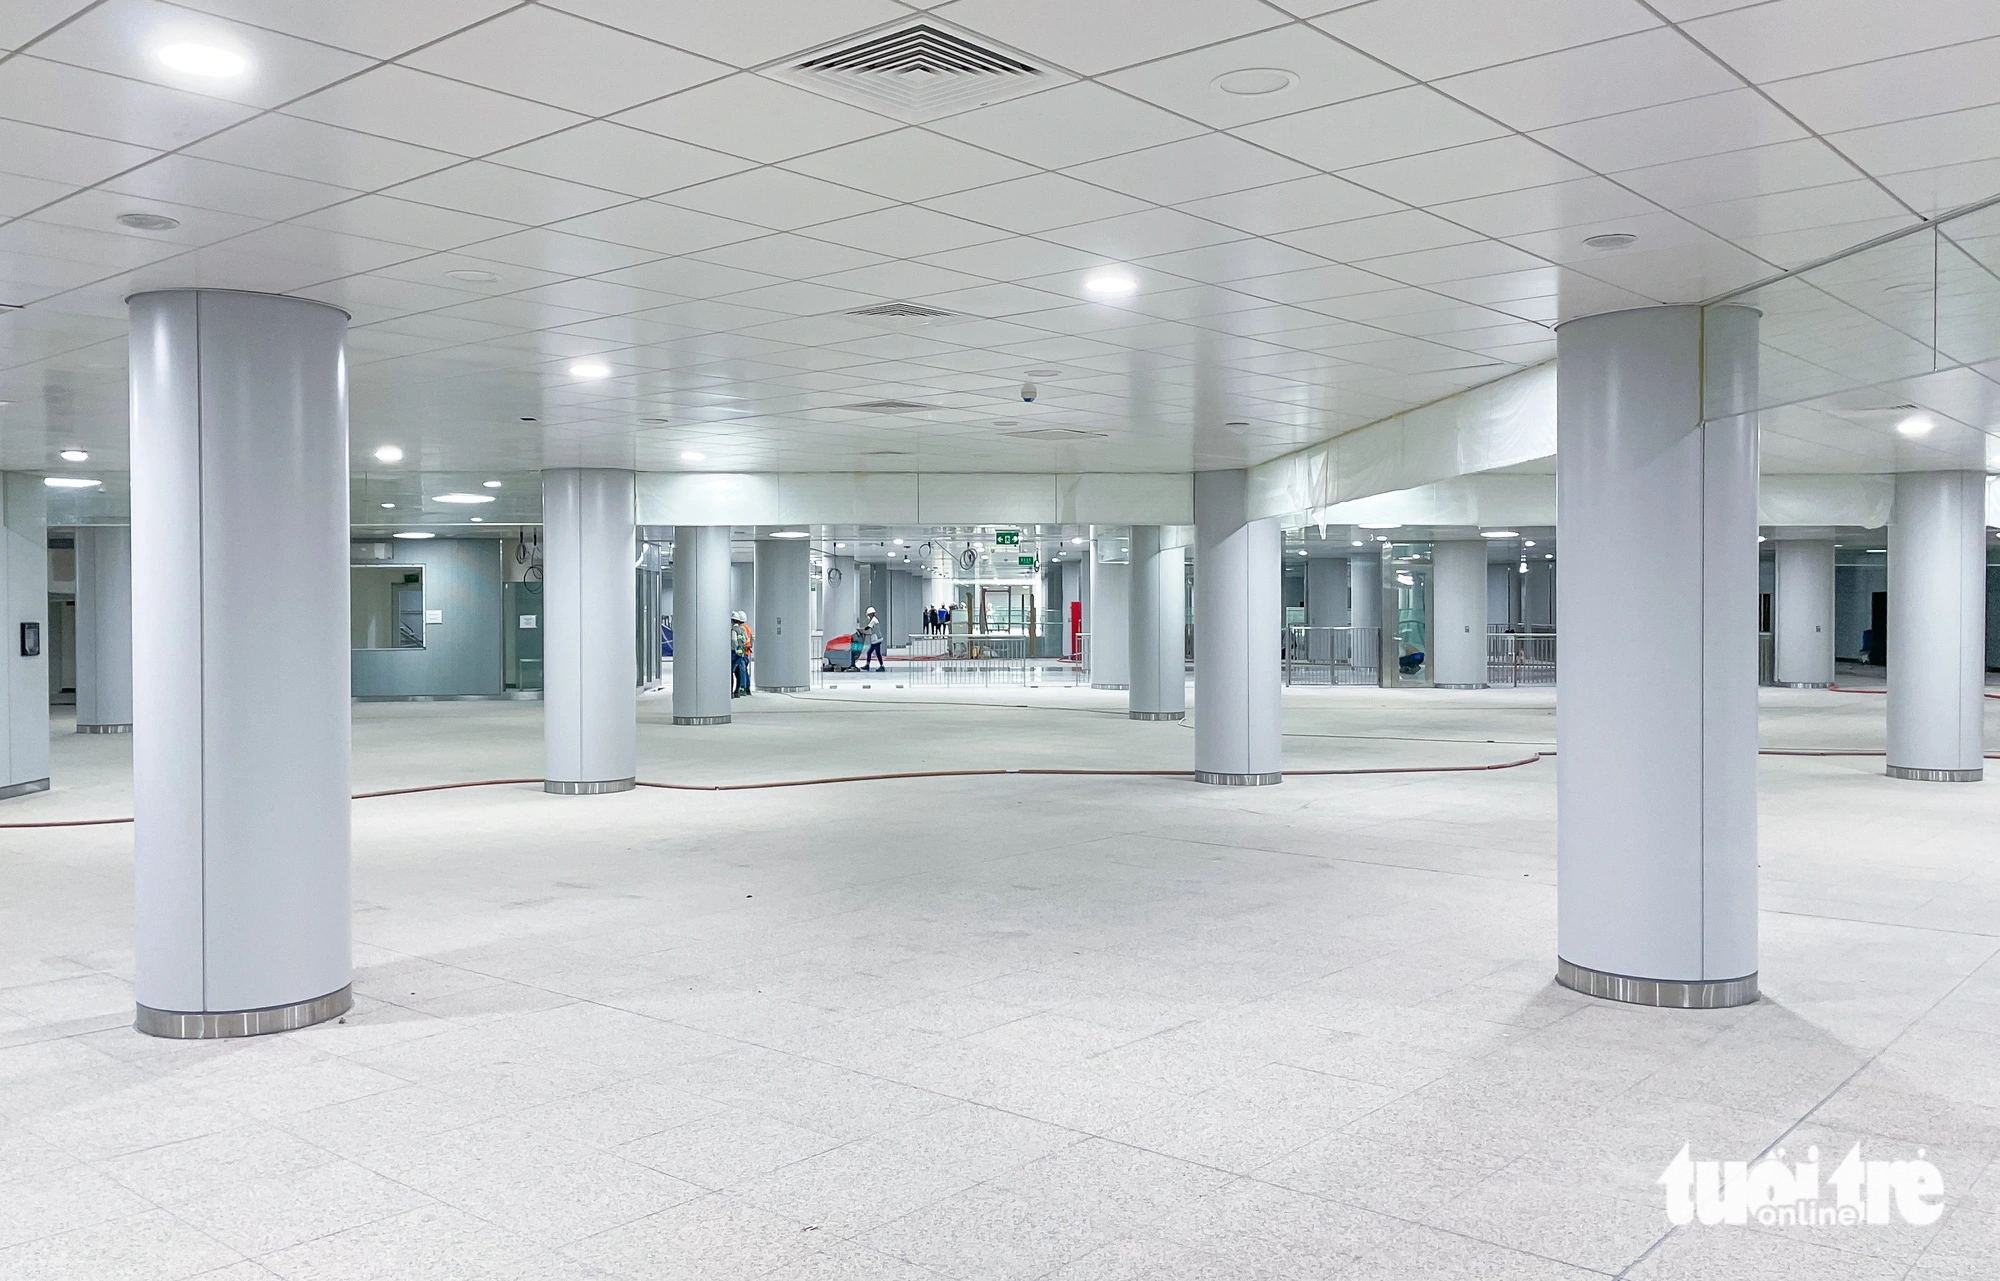 The first level of Ben Thanh station covers approximately 45,000 square meters and features nearly 200 concrete pillars enveloped in aluminum. Photo: Chau Tuan / Tuoi Tre